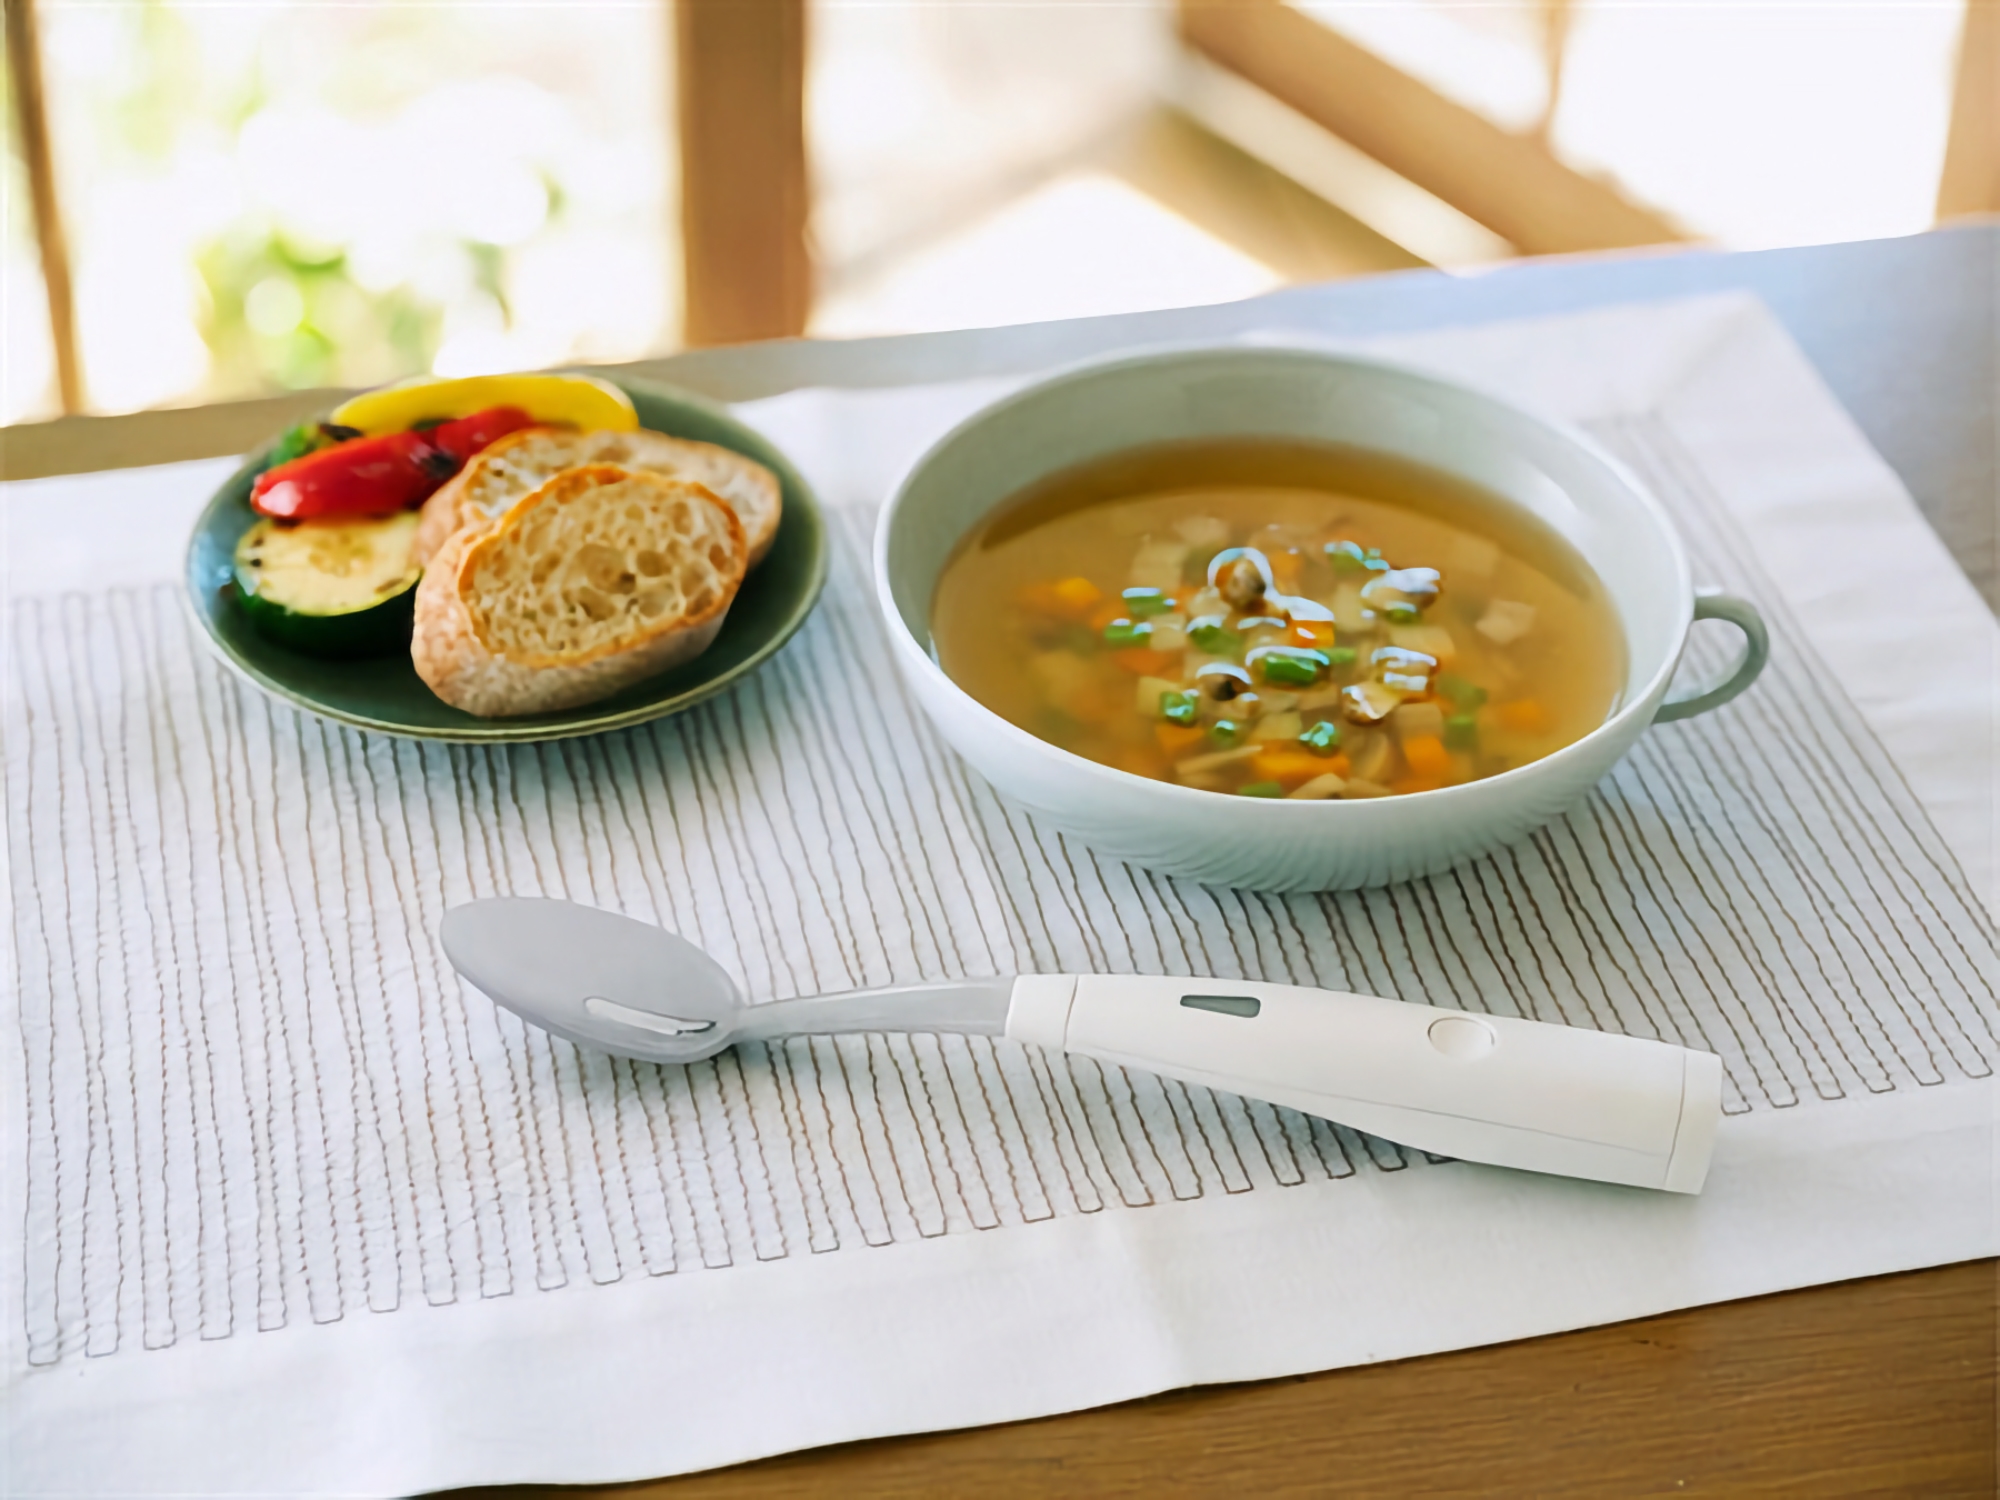 Japanese company Kirin has unveiled an electric spoon that can "salt" your food